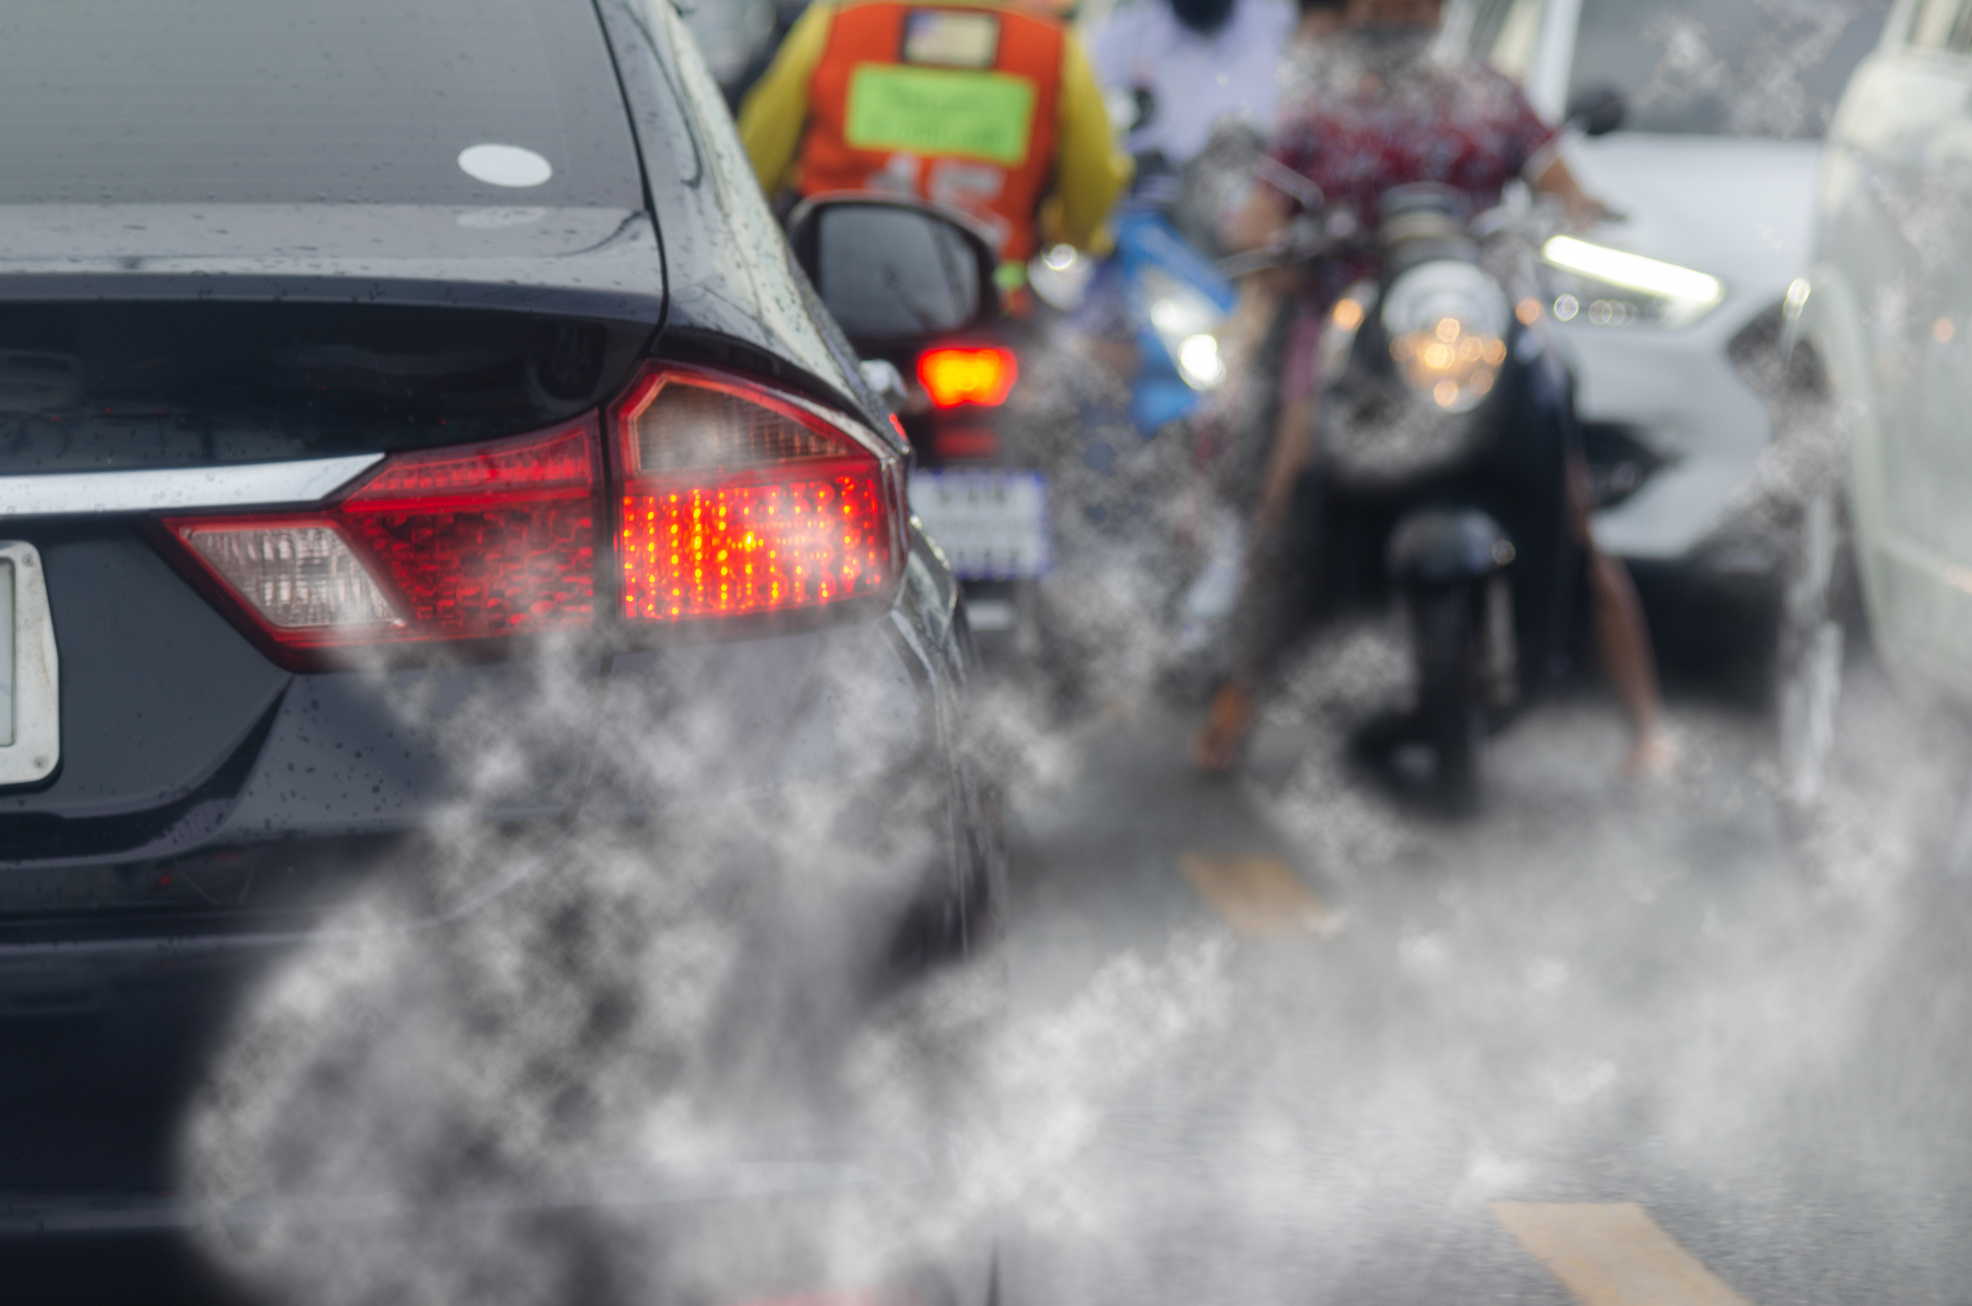 Smoke pollution from car exhaust pipes, traffic jams on the